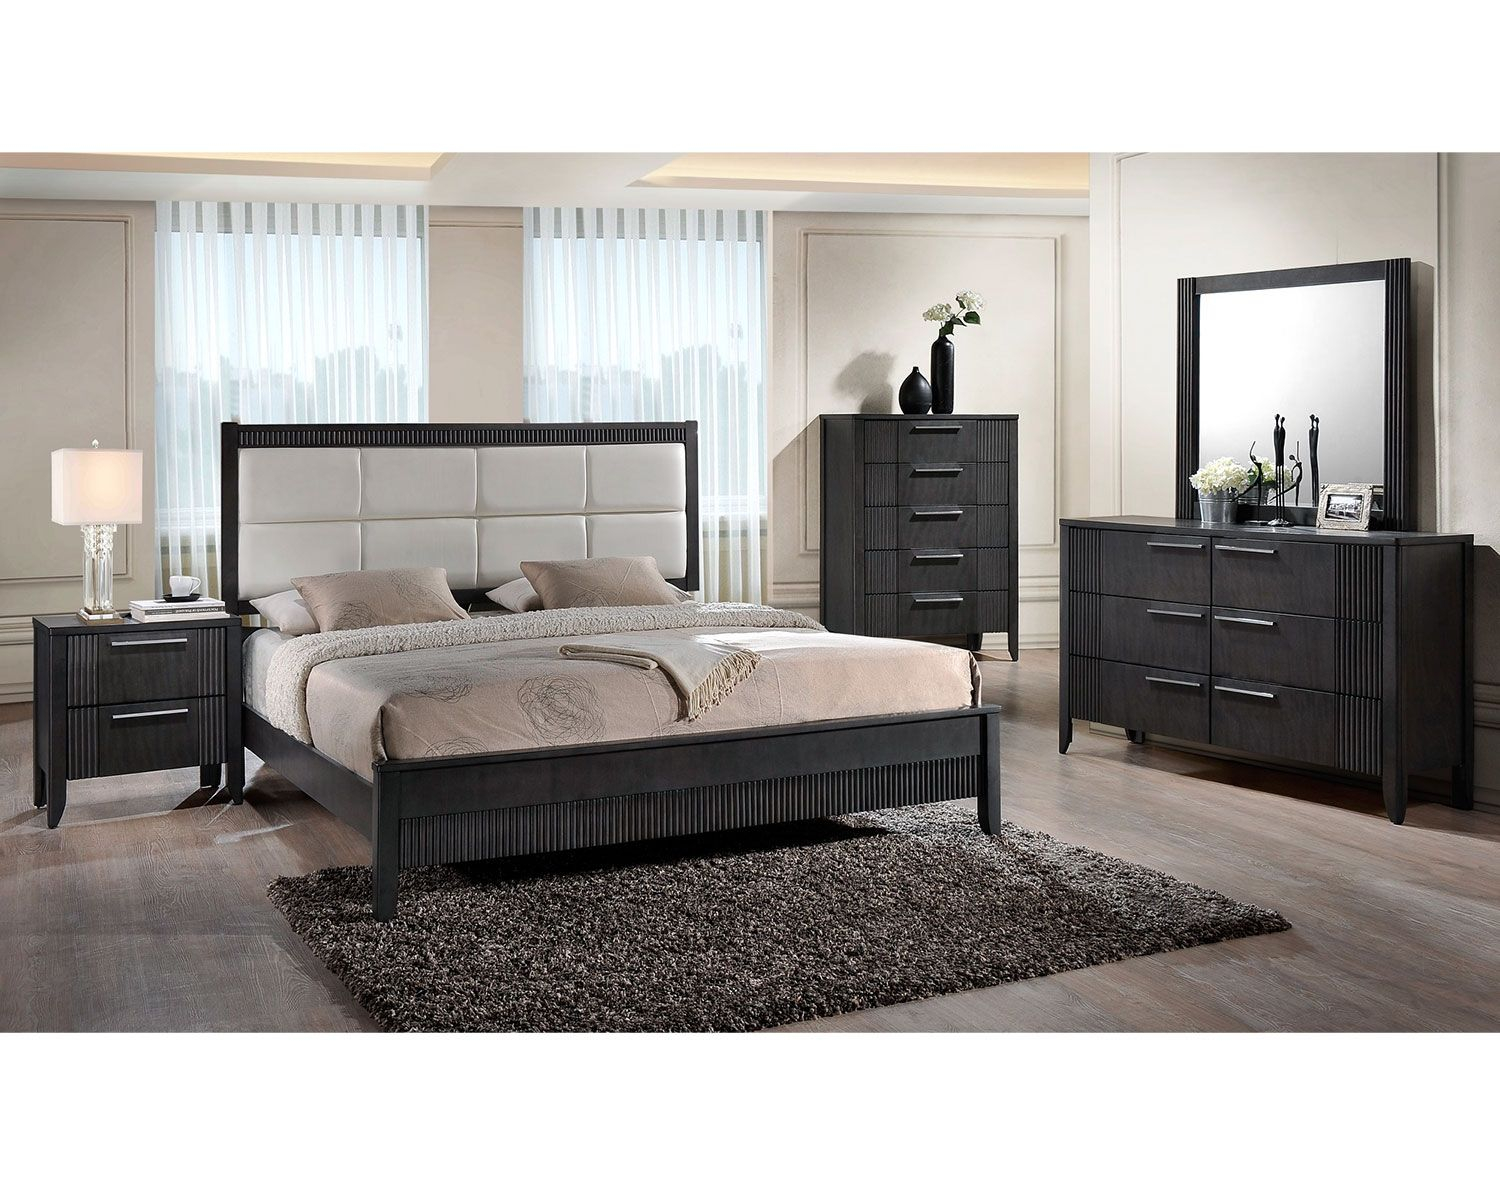 Falcon Grey Collection Leons Not My House Bedroom Sets King inside proportions 1500 X 1185